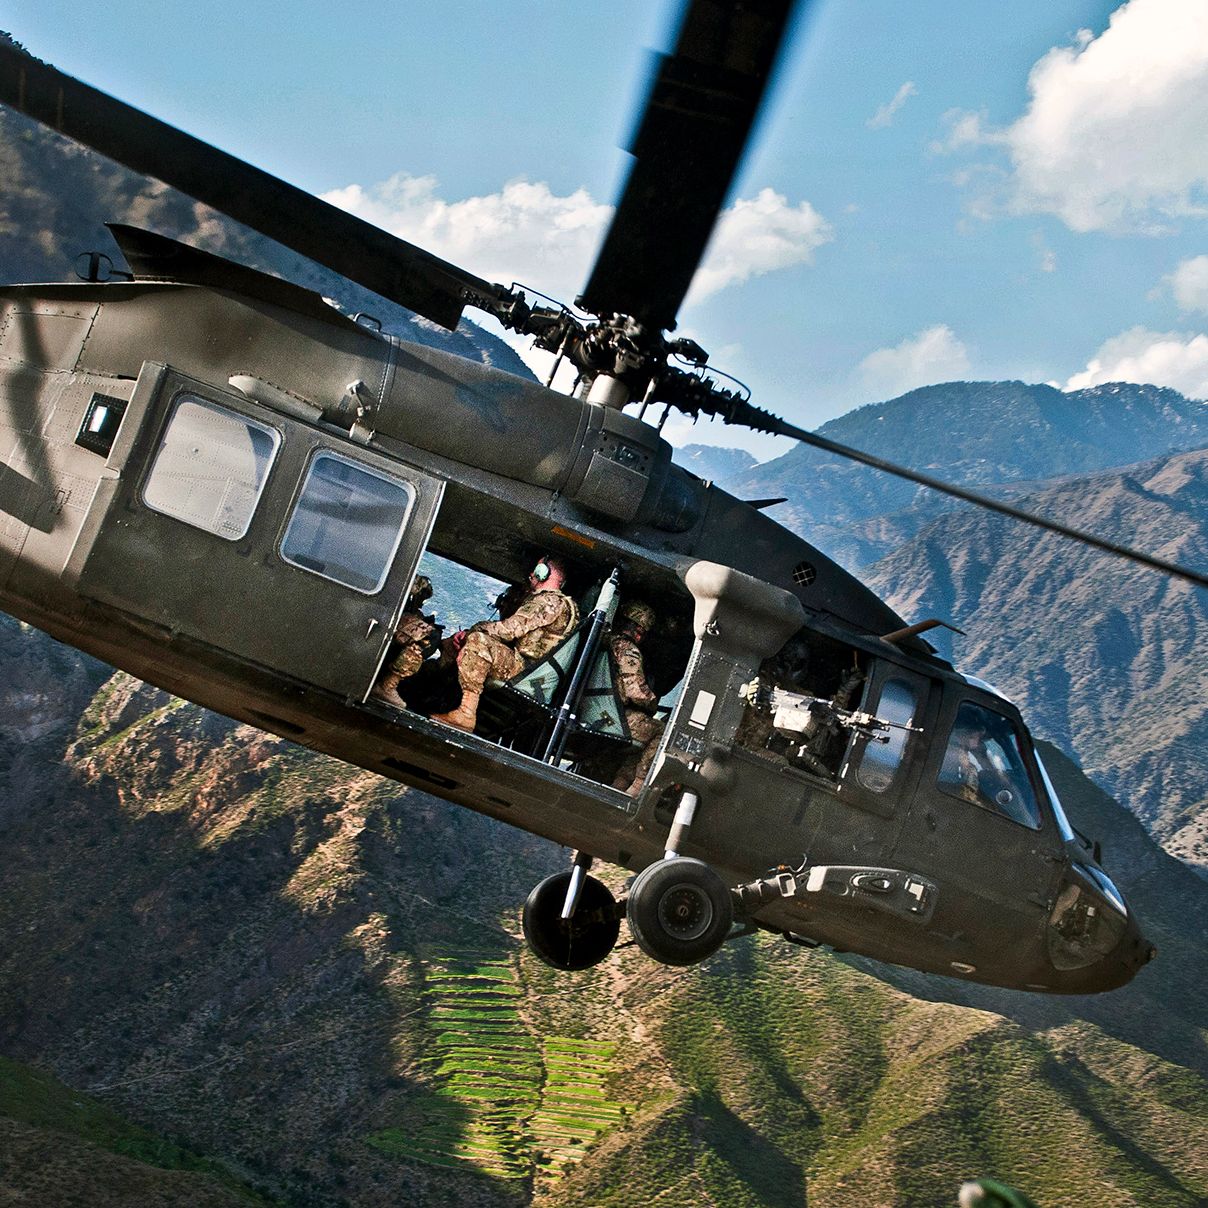 Why the UH-60 Black Hawk Is Such a Badass Helo